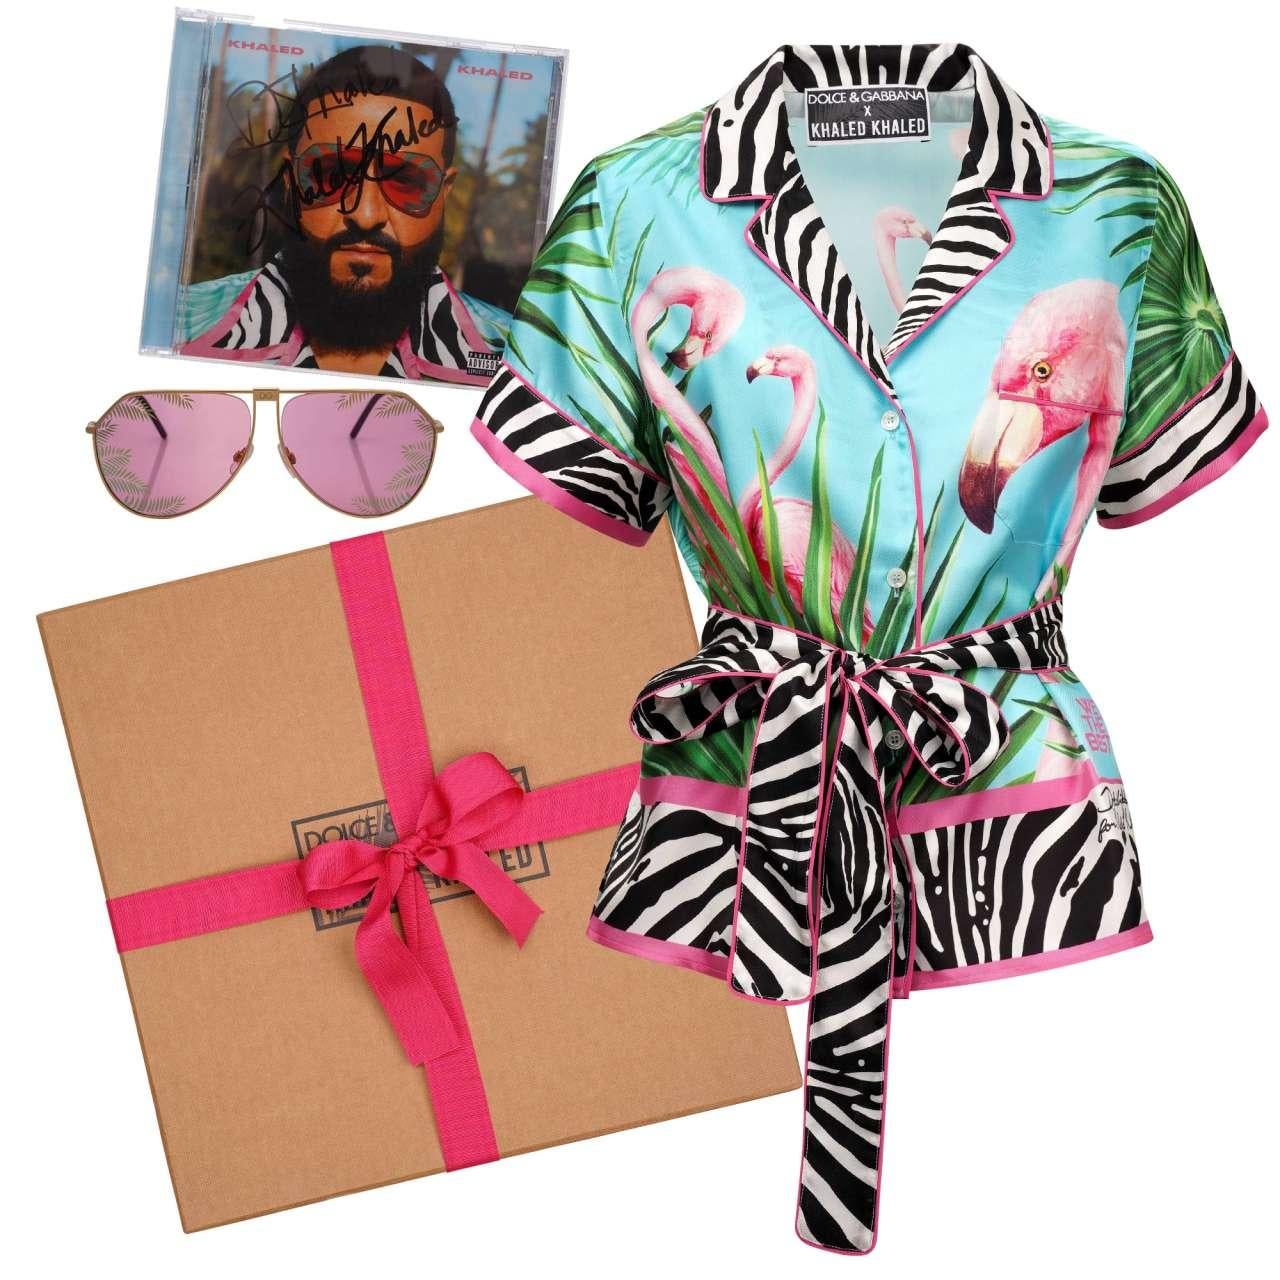 - Special edition by DJ Khaled and DG with Silk Flamingo and Zebra print blouse with belt, tropical Sunglasses and signed CD by DOLCE & GABBANA X KHALED KHALED - New with special Box - Former RRP: EUR 1,355 - MADE IN ITALY - Wide F- Model: